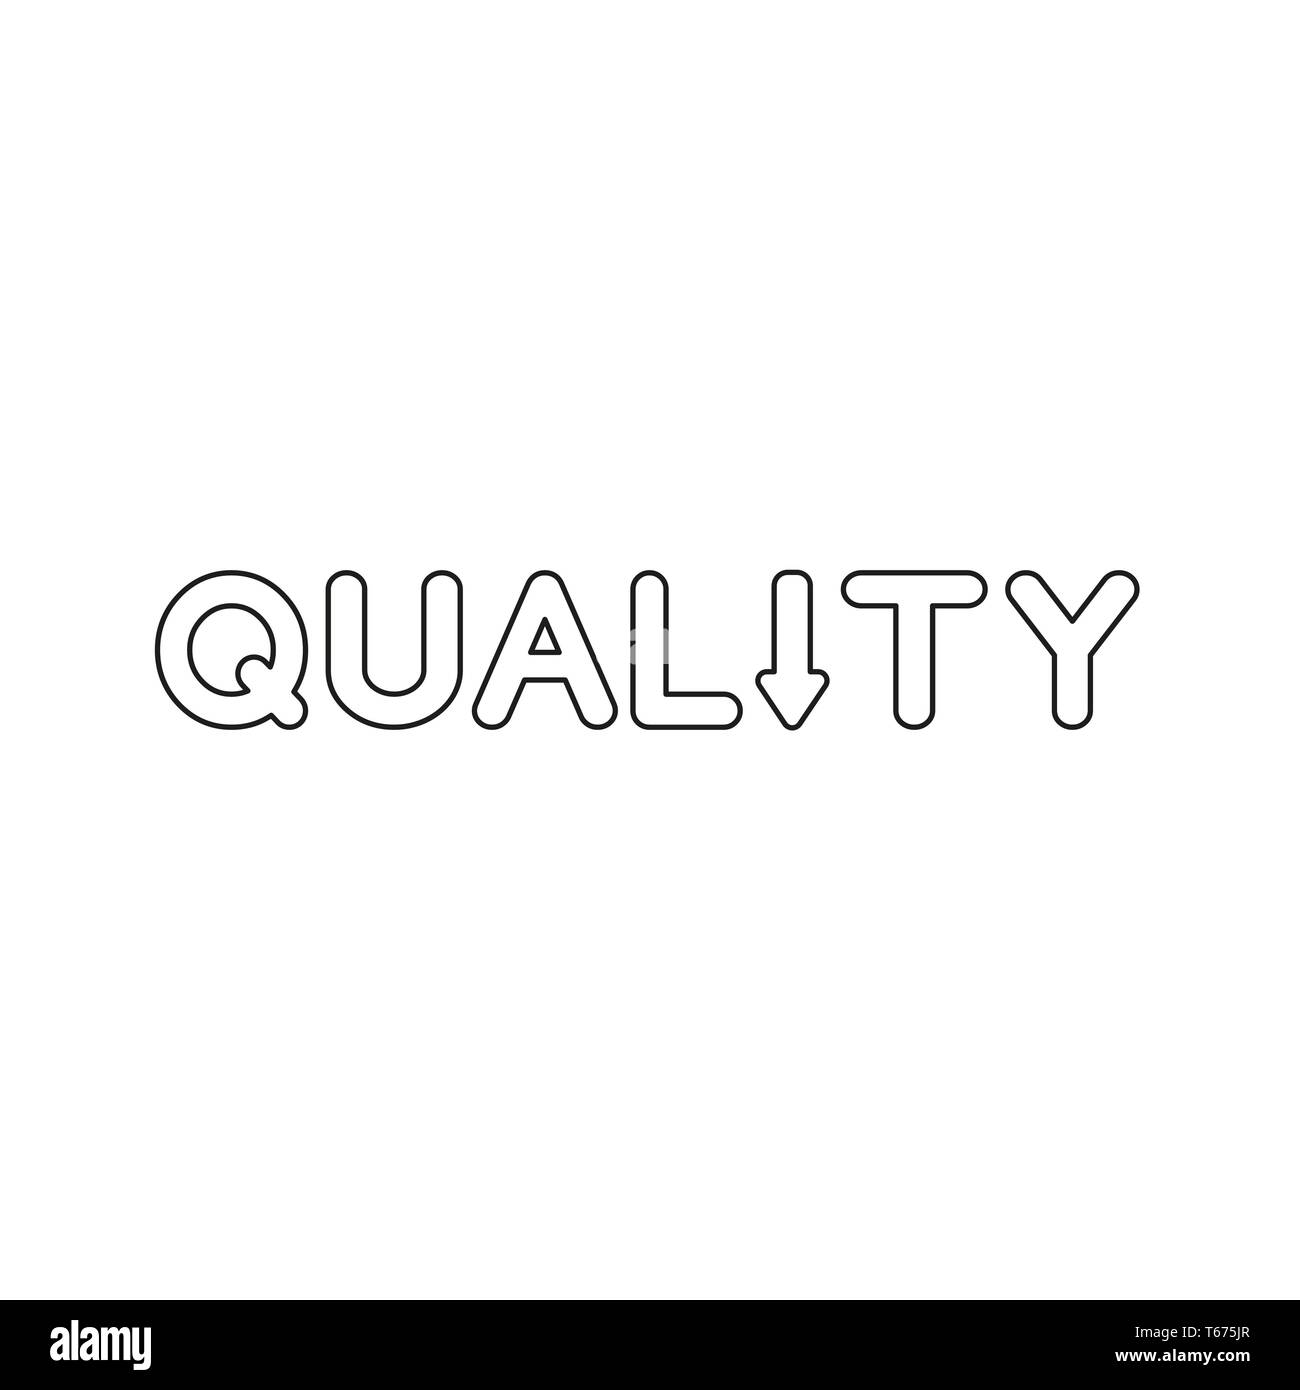 Vector icon concept of quality word text with arrow moving down. Black outlines. Stock Vector